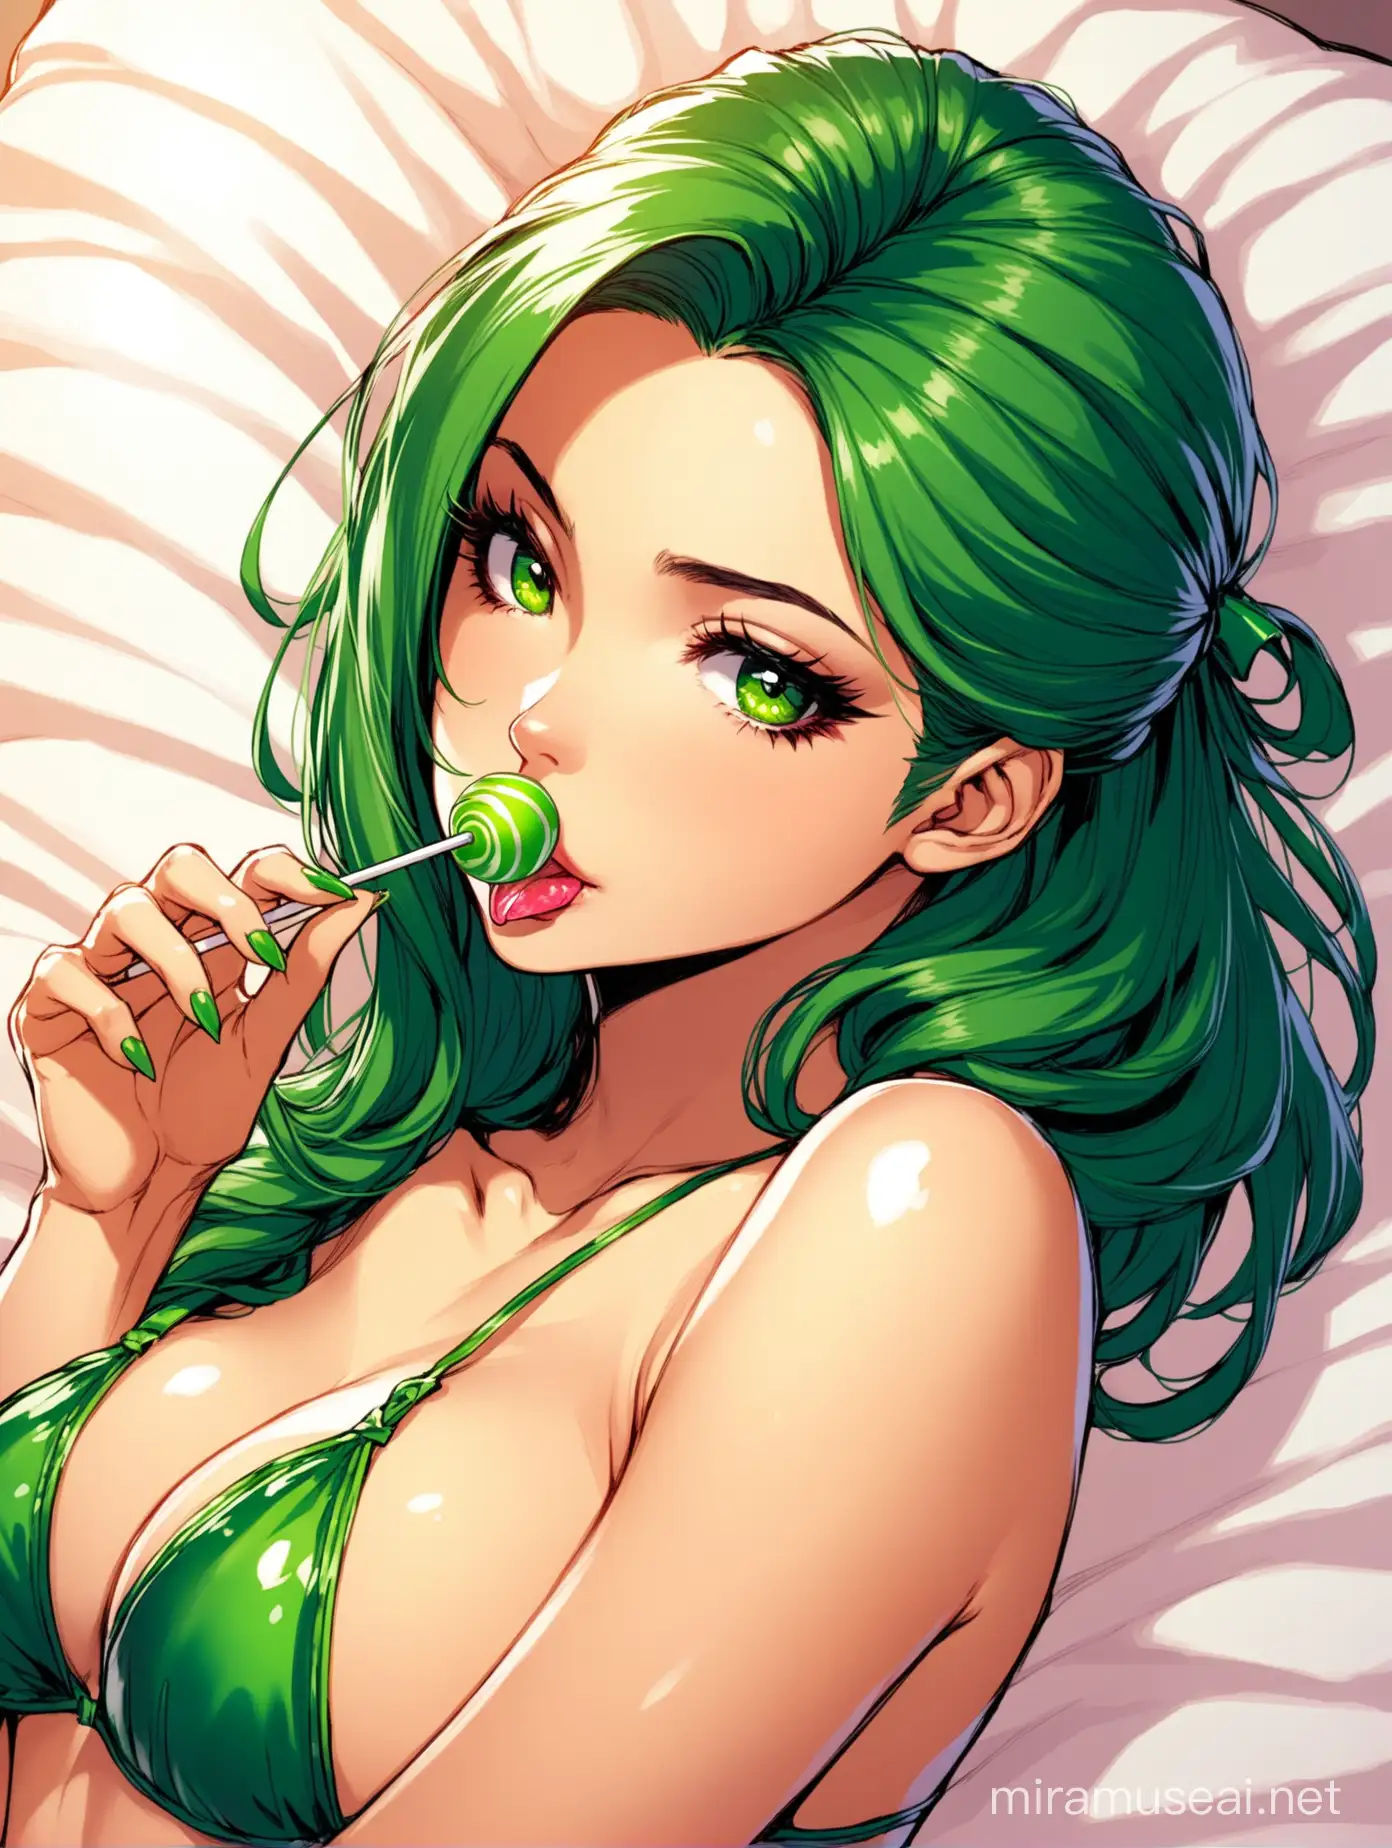 Rogue (from X-men)laying in a bed, her hair half up,  tied in a green ribbon, she is wearing a green strap lingerie, licking a lollipop, seductive expression, above view 